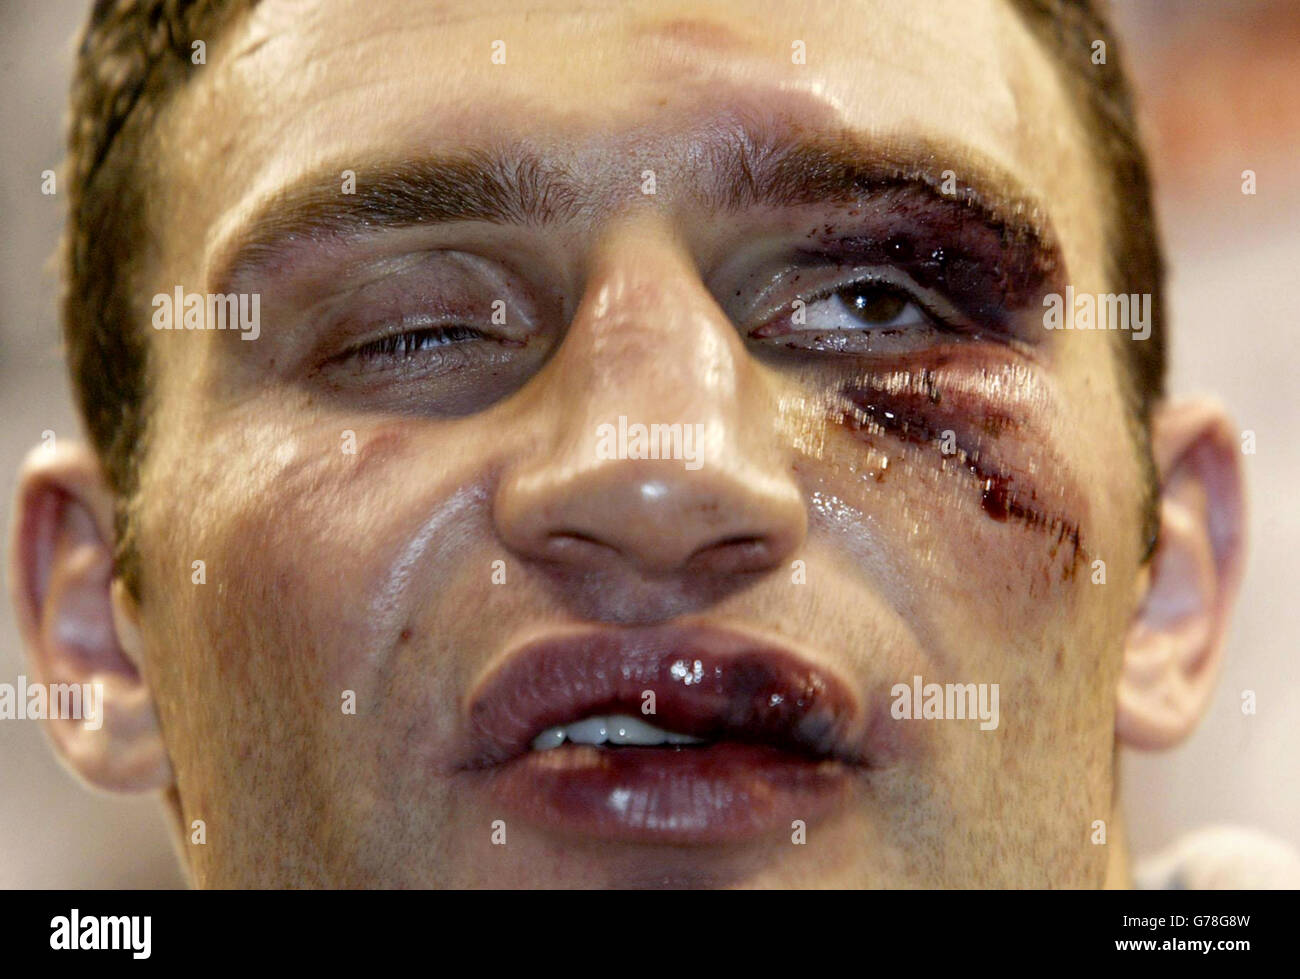 the-badly-cut-face-of-the-defeated-vitali-klitschko-at-the-post-fight-G78G8W.jpg